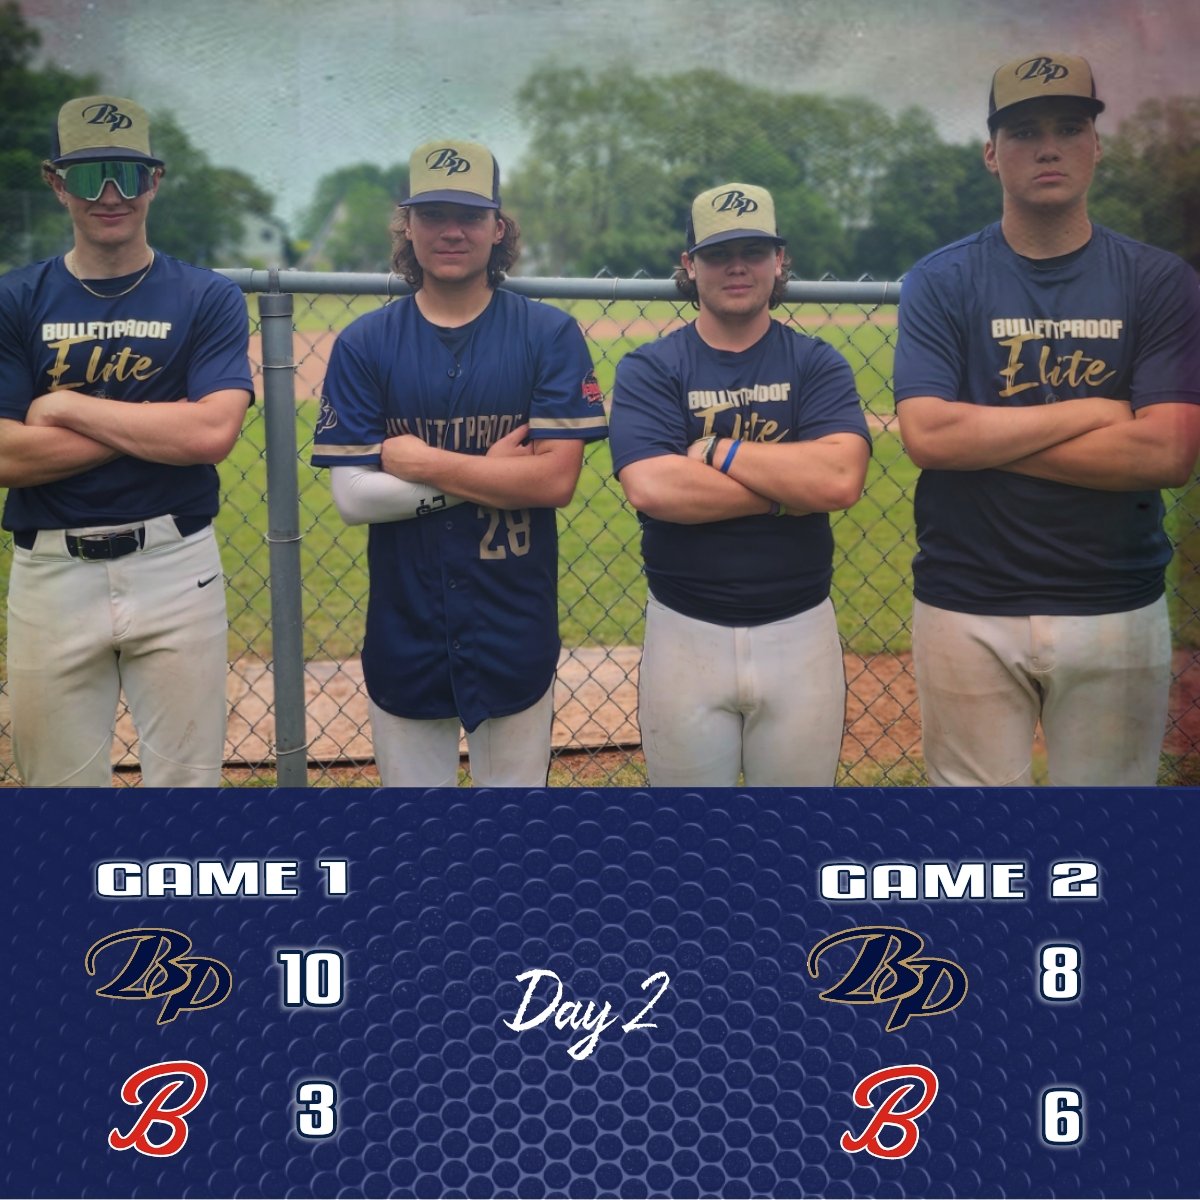 2 dubs to finish the weekend. Some notable performances from the 4 game set: @SethRanieri 5/9, 10RBIs, GSlam💣 Will Baltrusiunas 6/10 @JaxArcuri 6/11, HR💣 @AidanMcDonald77 5/12, HR💣 Jack Shannon 💣 @RyanCulig 6IP, 0H, 8SO @cupolo11 7IP, 11SO @nolanbrowne_ 4IP, 1H, 8SO